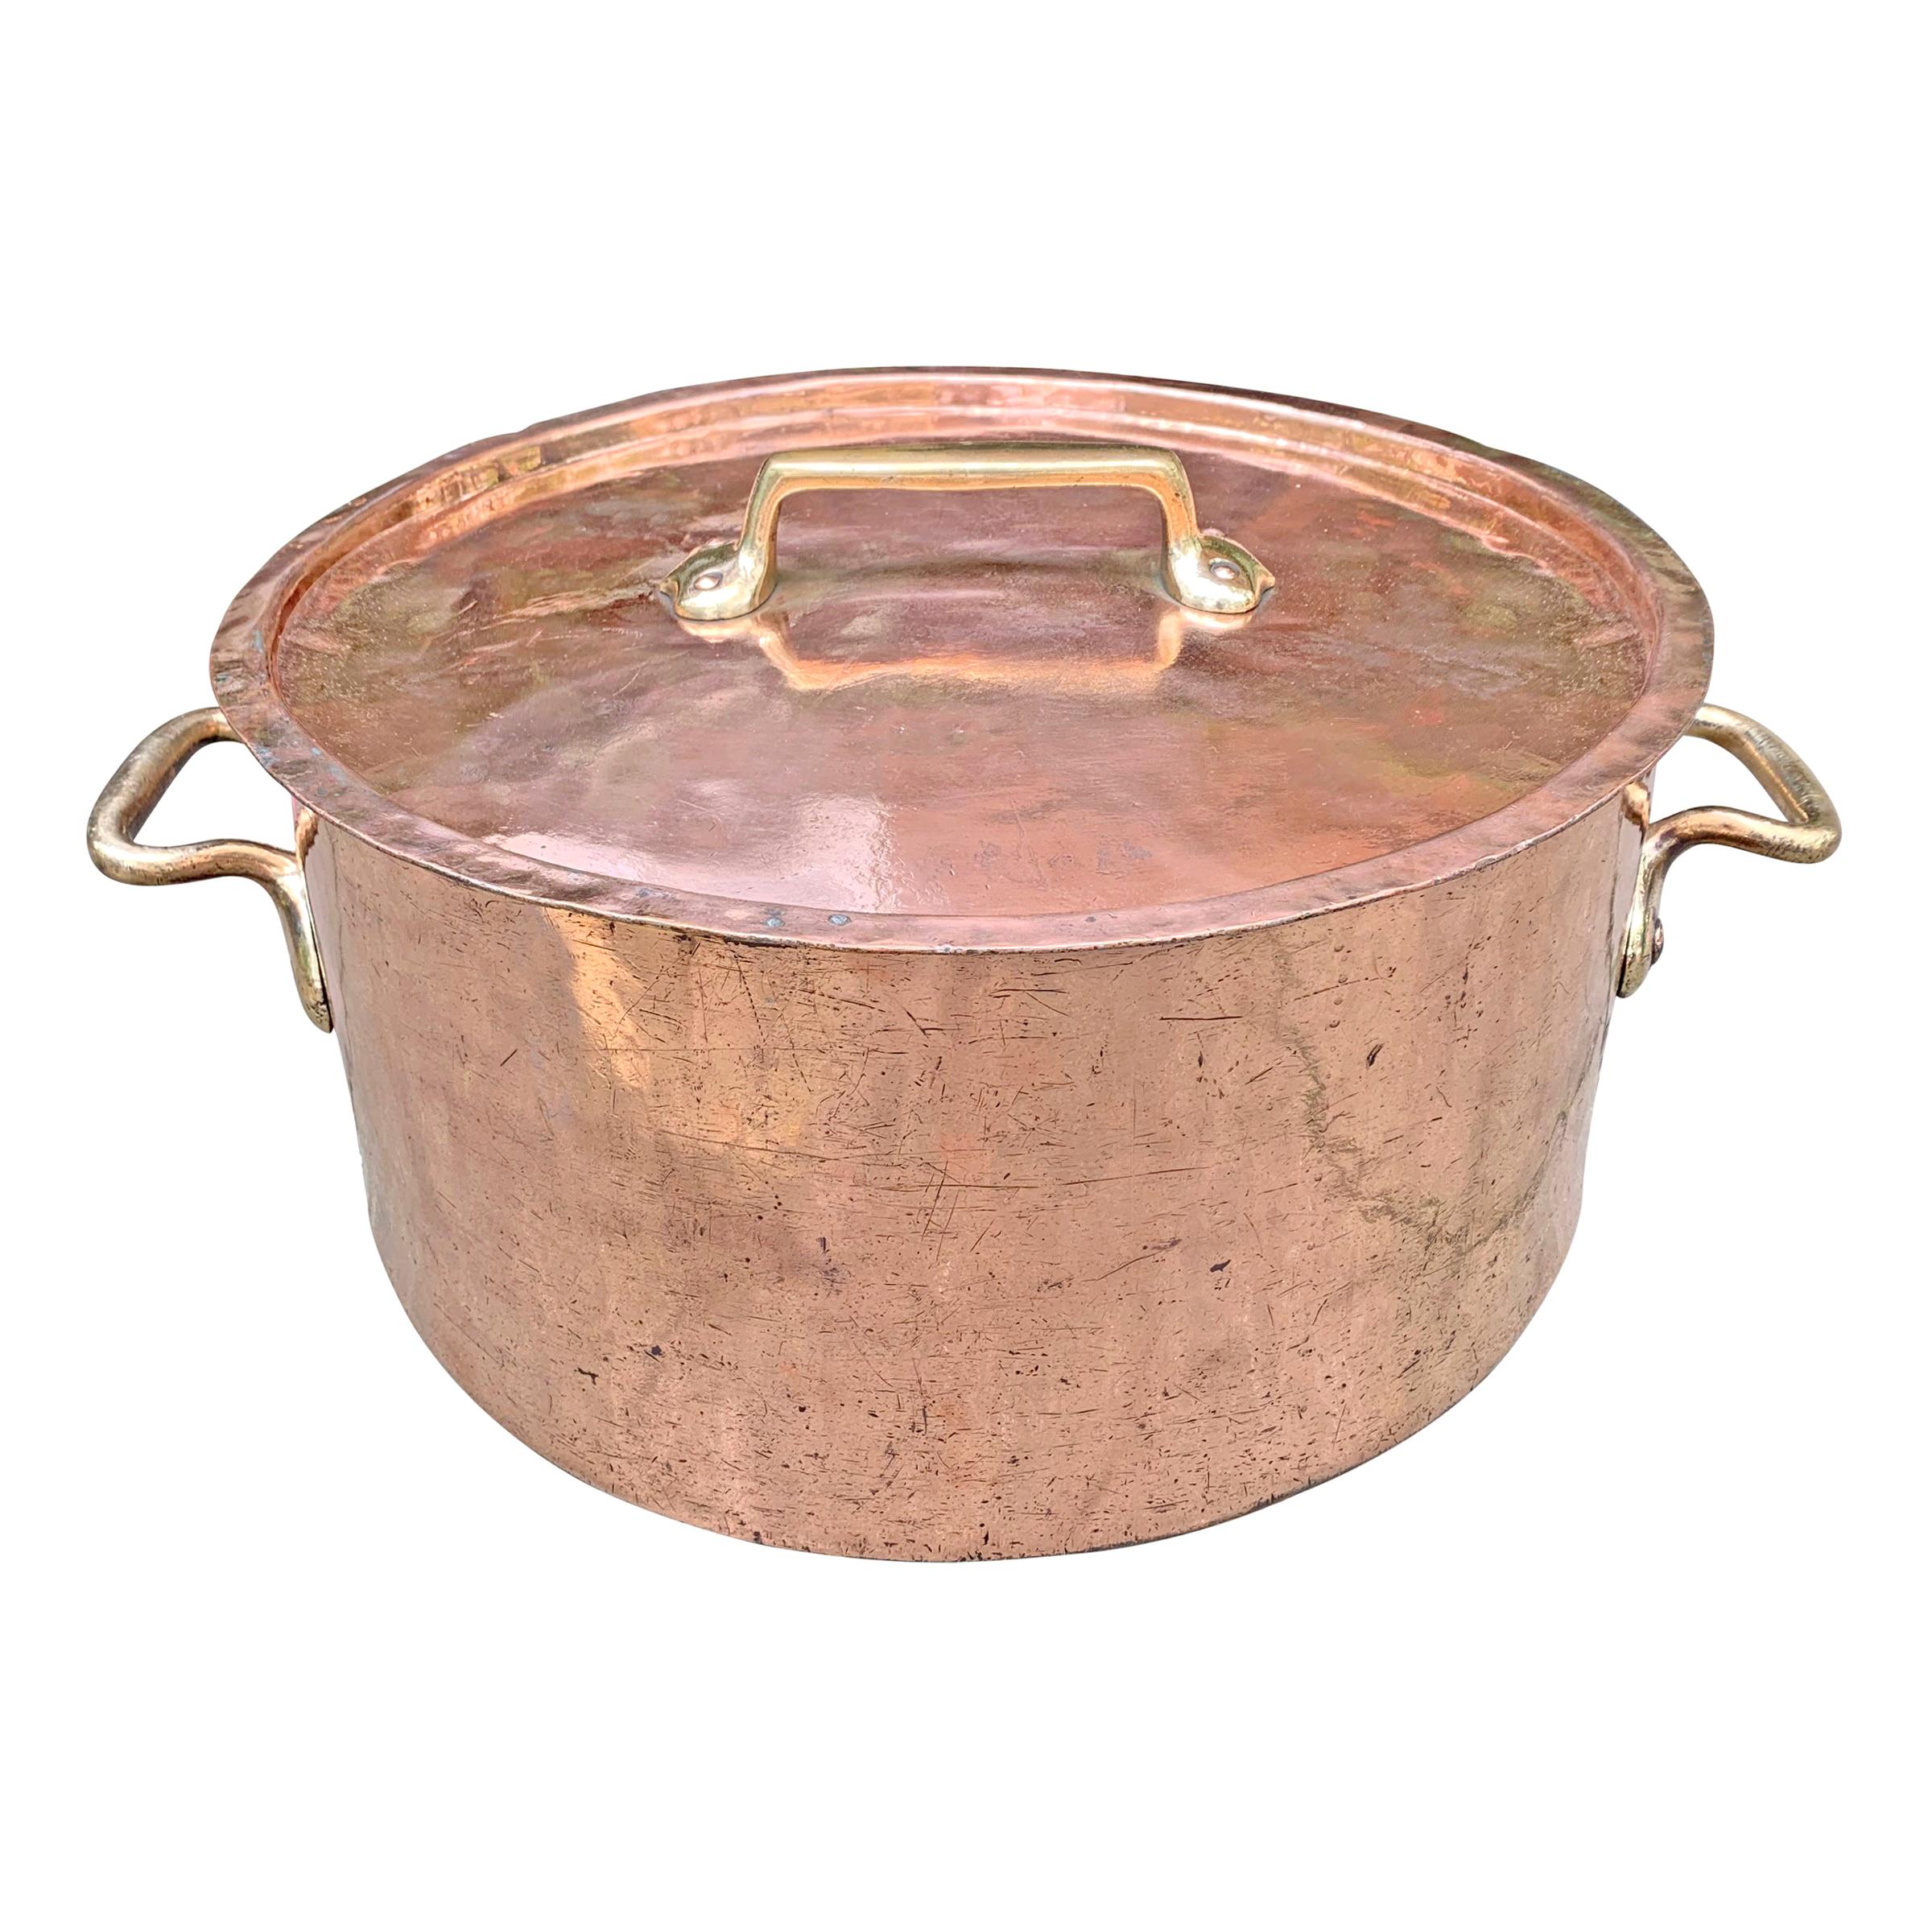 Monumental 65-Quart Copper Pot from a Country House